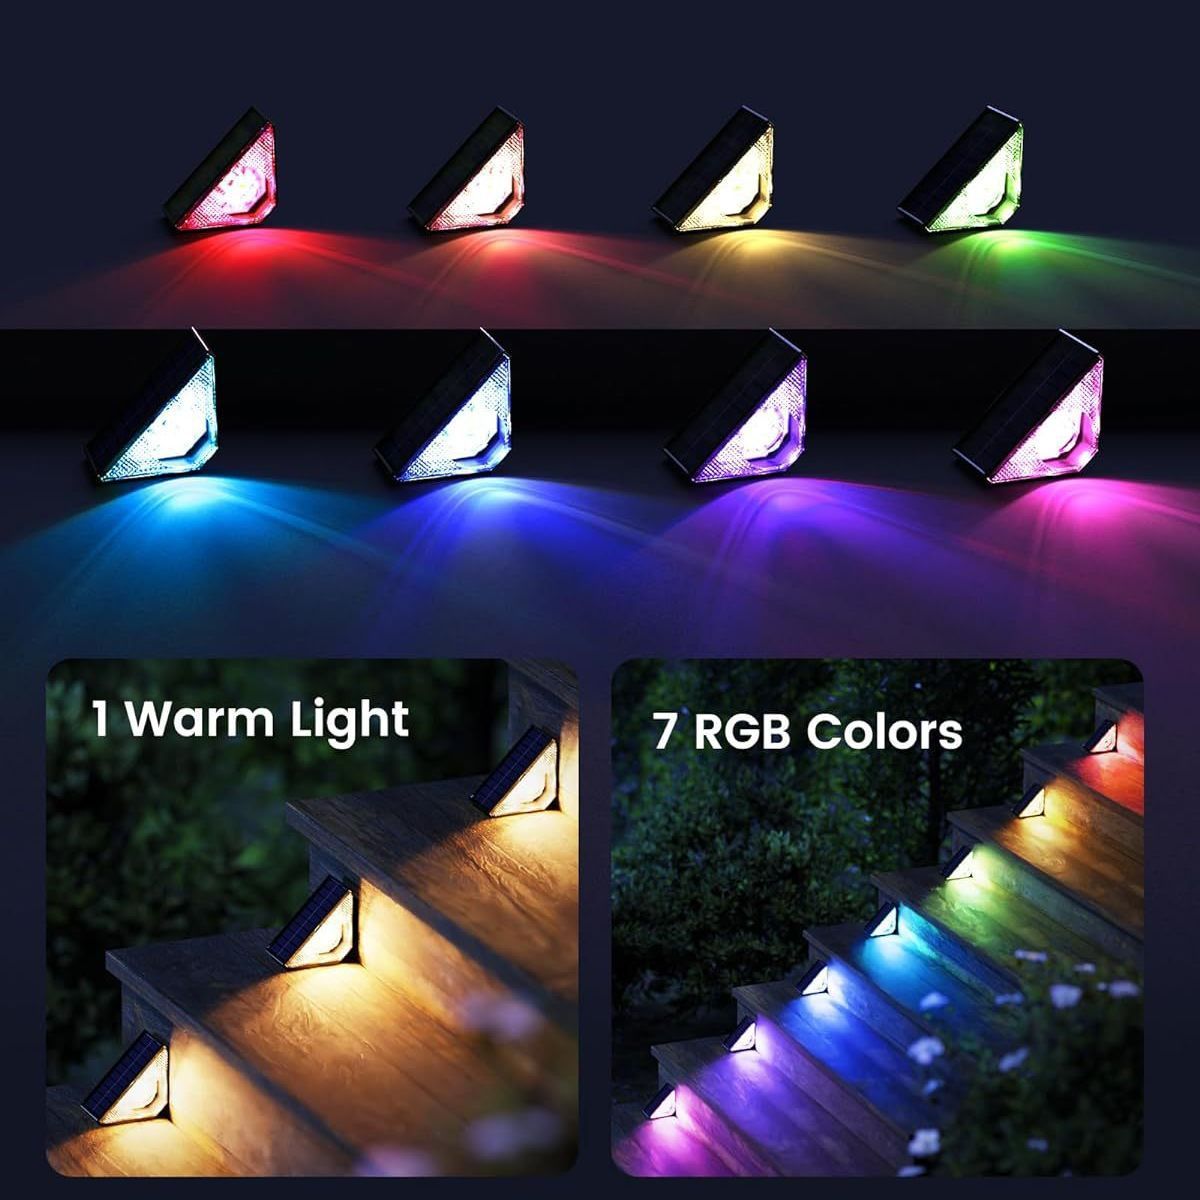 Solar Step Lights Waterproof, Warm & 7 RGB Colors Deck Lights Solar Powered, Triangle-Shaped Solar Stair Lights for Outside Patio Decor Porch Backyard